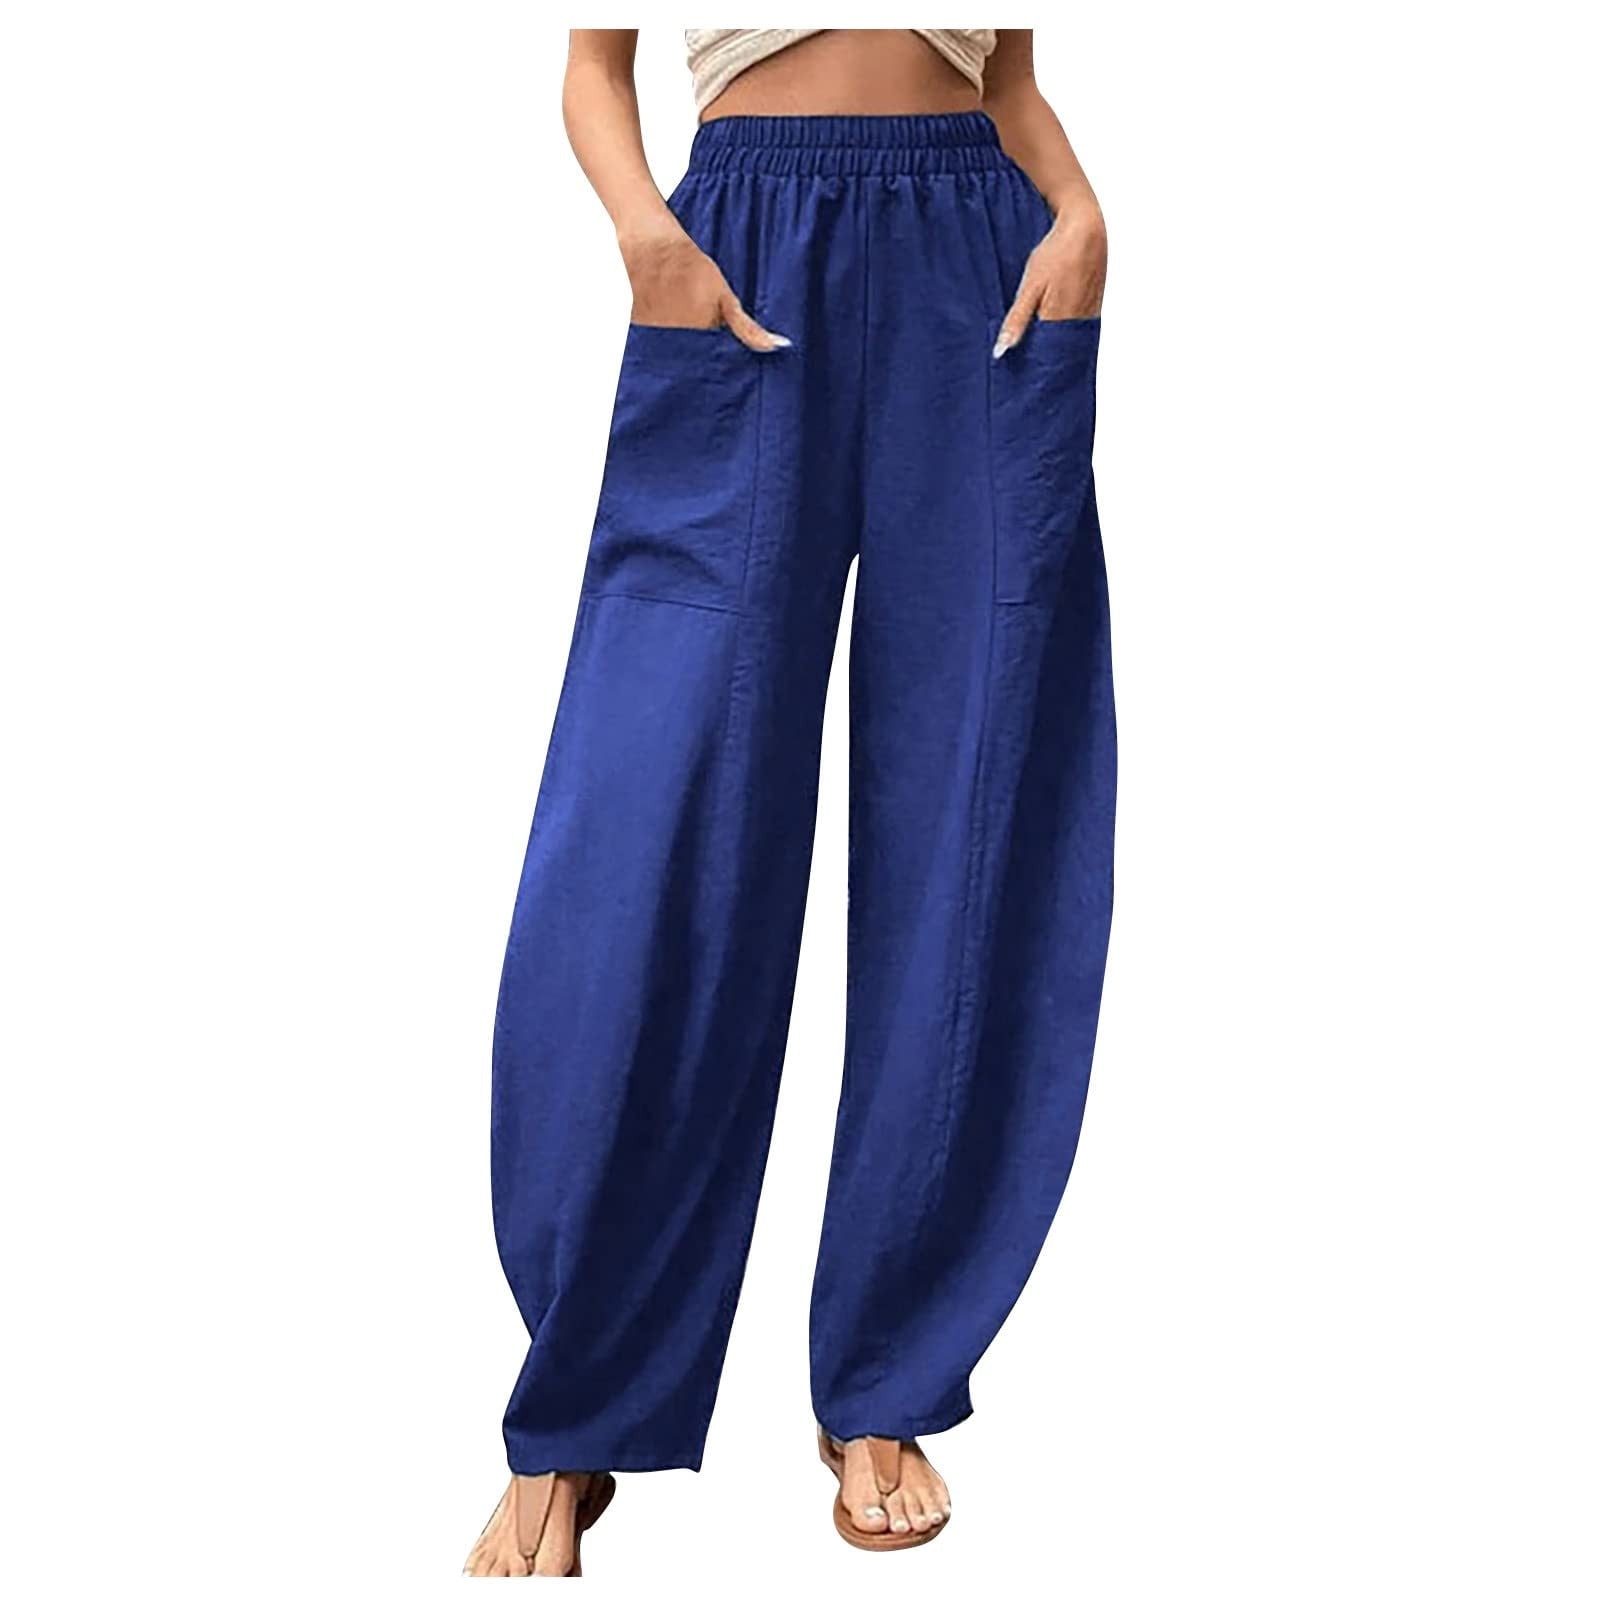 SMihono Women's Trendy Casual Loose Baggy Pocket Pants Fashion Playsuit  Trousers Overalls Cotton And Linen Pants Young Adult Love 2023 Female  Fashion Blue 18 